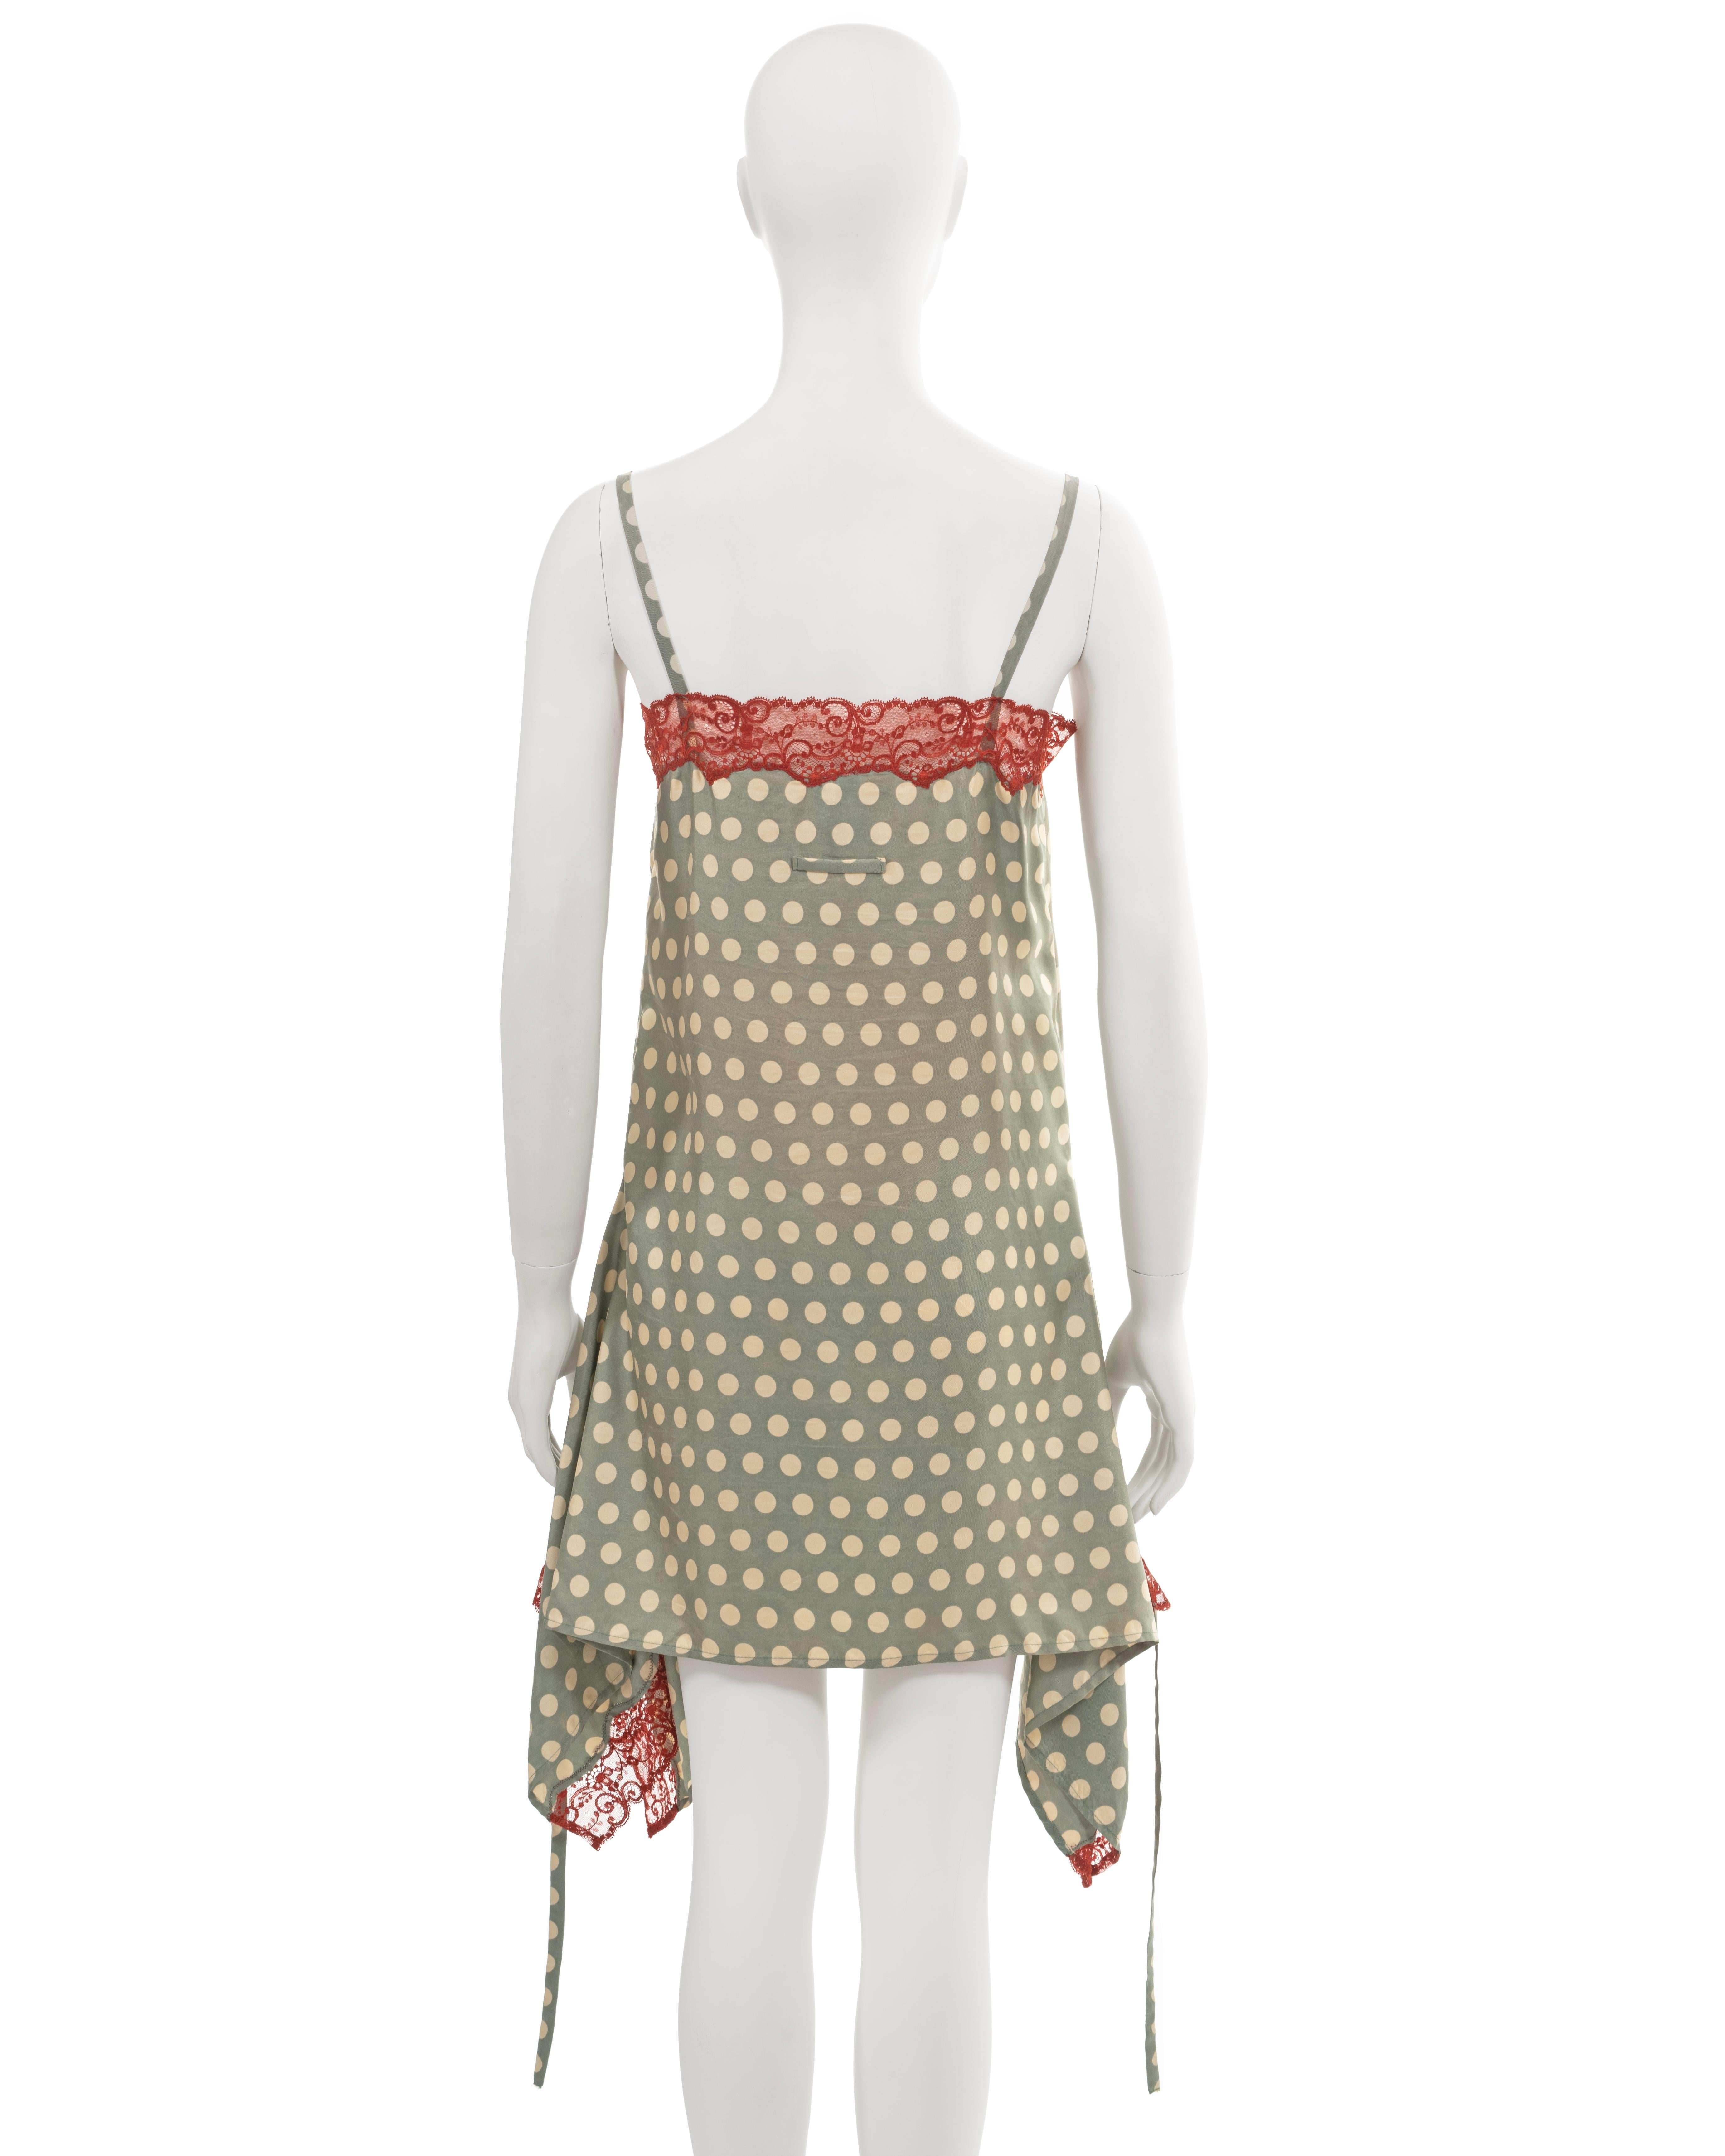 Jean Paul Gaultier green polkadot silk slip dress with red lace trim, ss 1992 For Sale 4